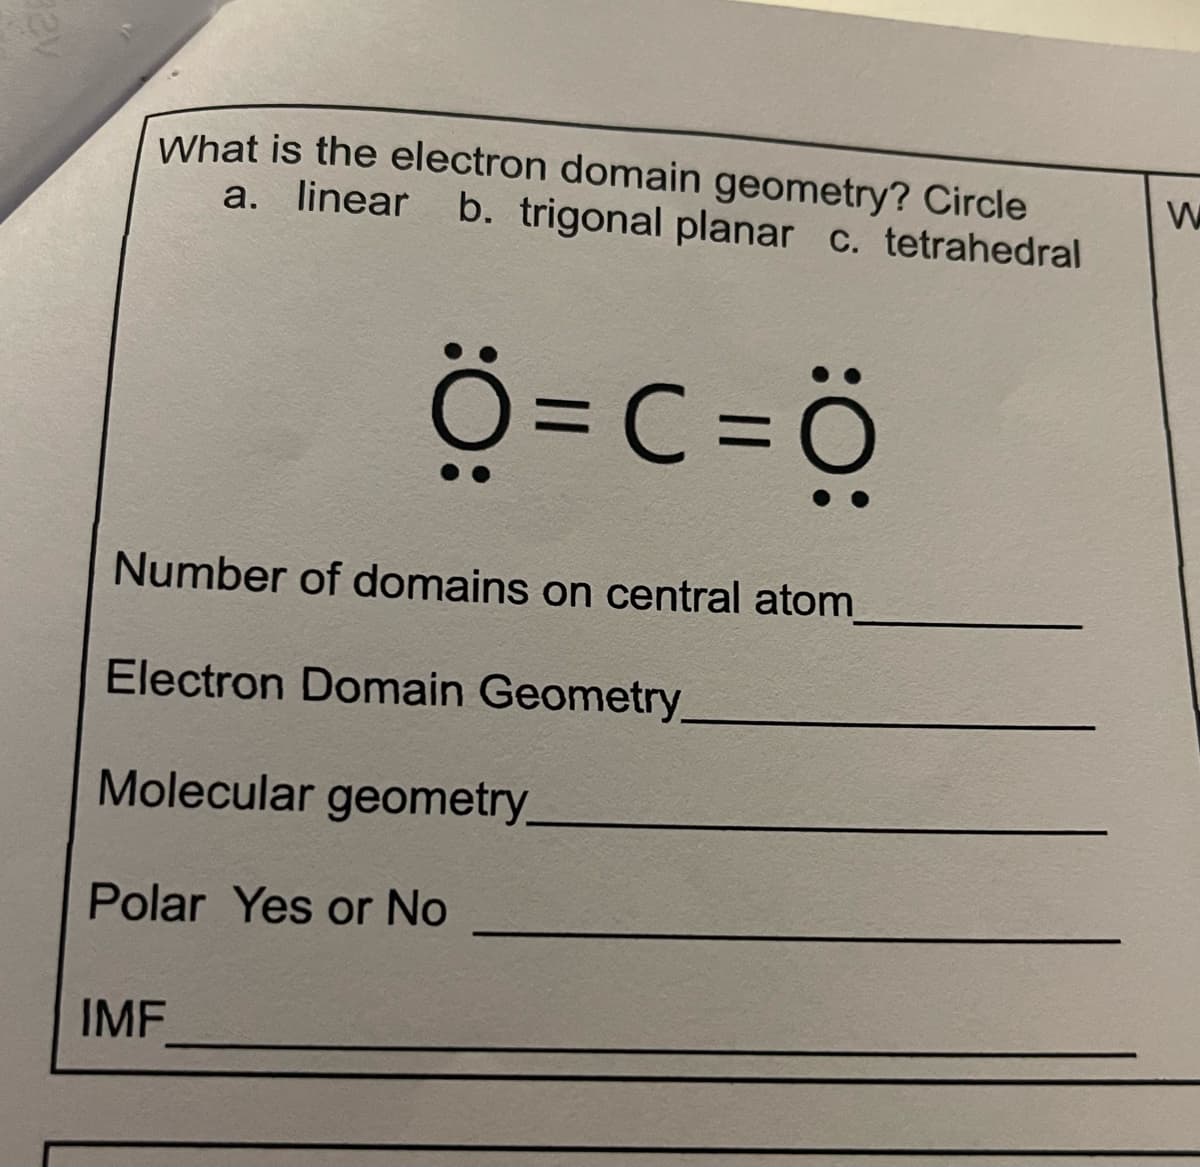 What is the electron domain geometry? Circle
a. linear
b. trigonal planar c. tetrahedral
Ö=C=ö
Number of domains on central atom
Electron Domain Geometry
Molecular geometry
Polar Yes or No
IMF
